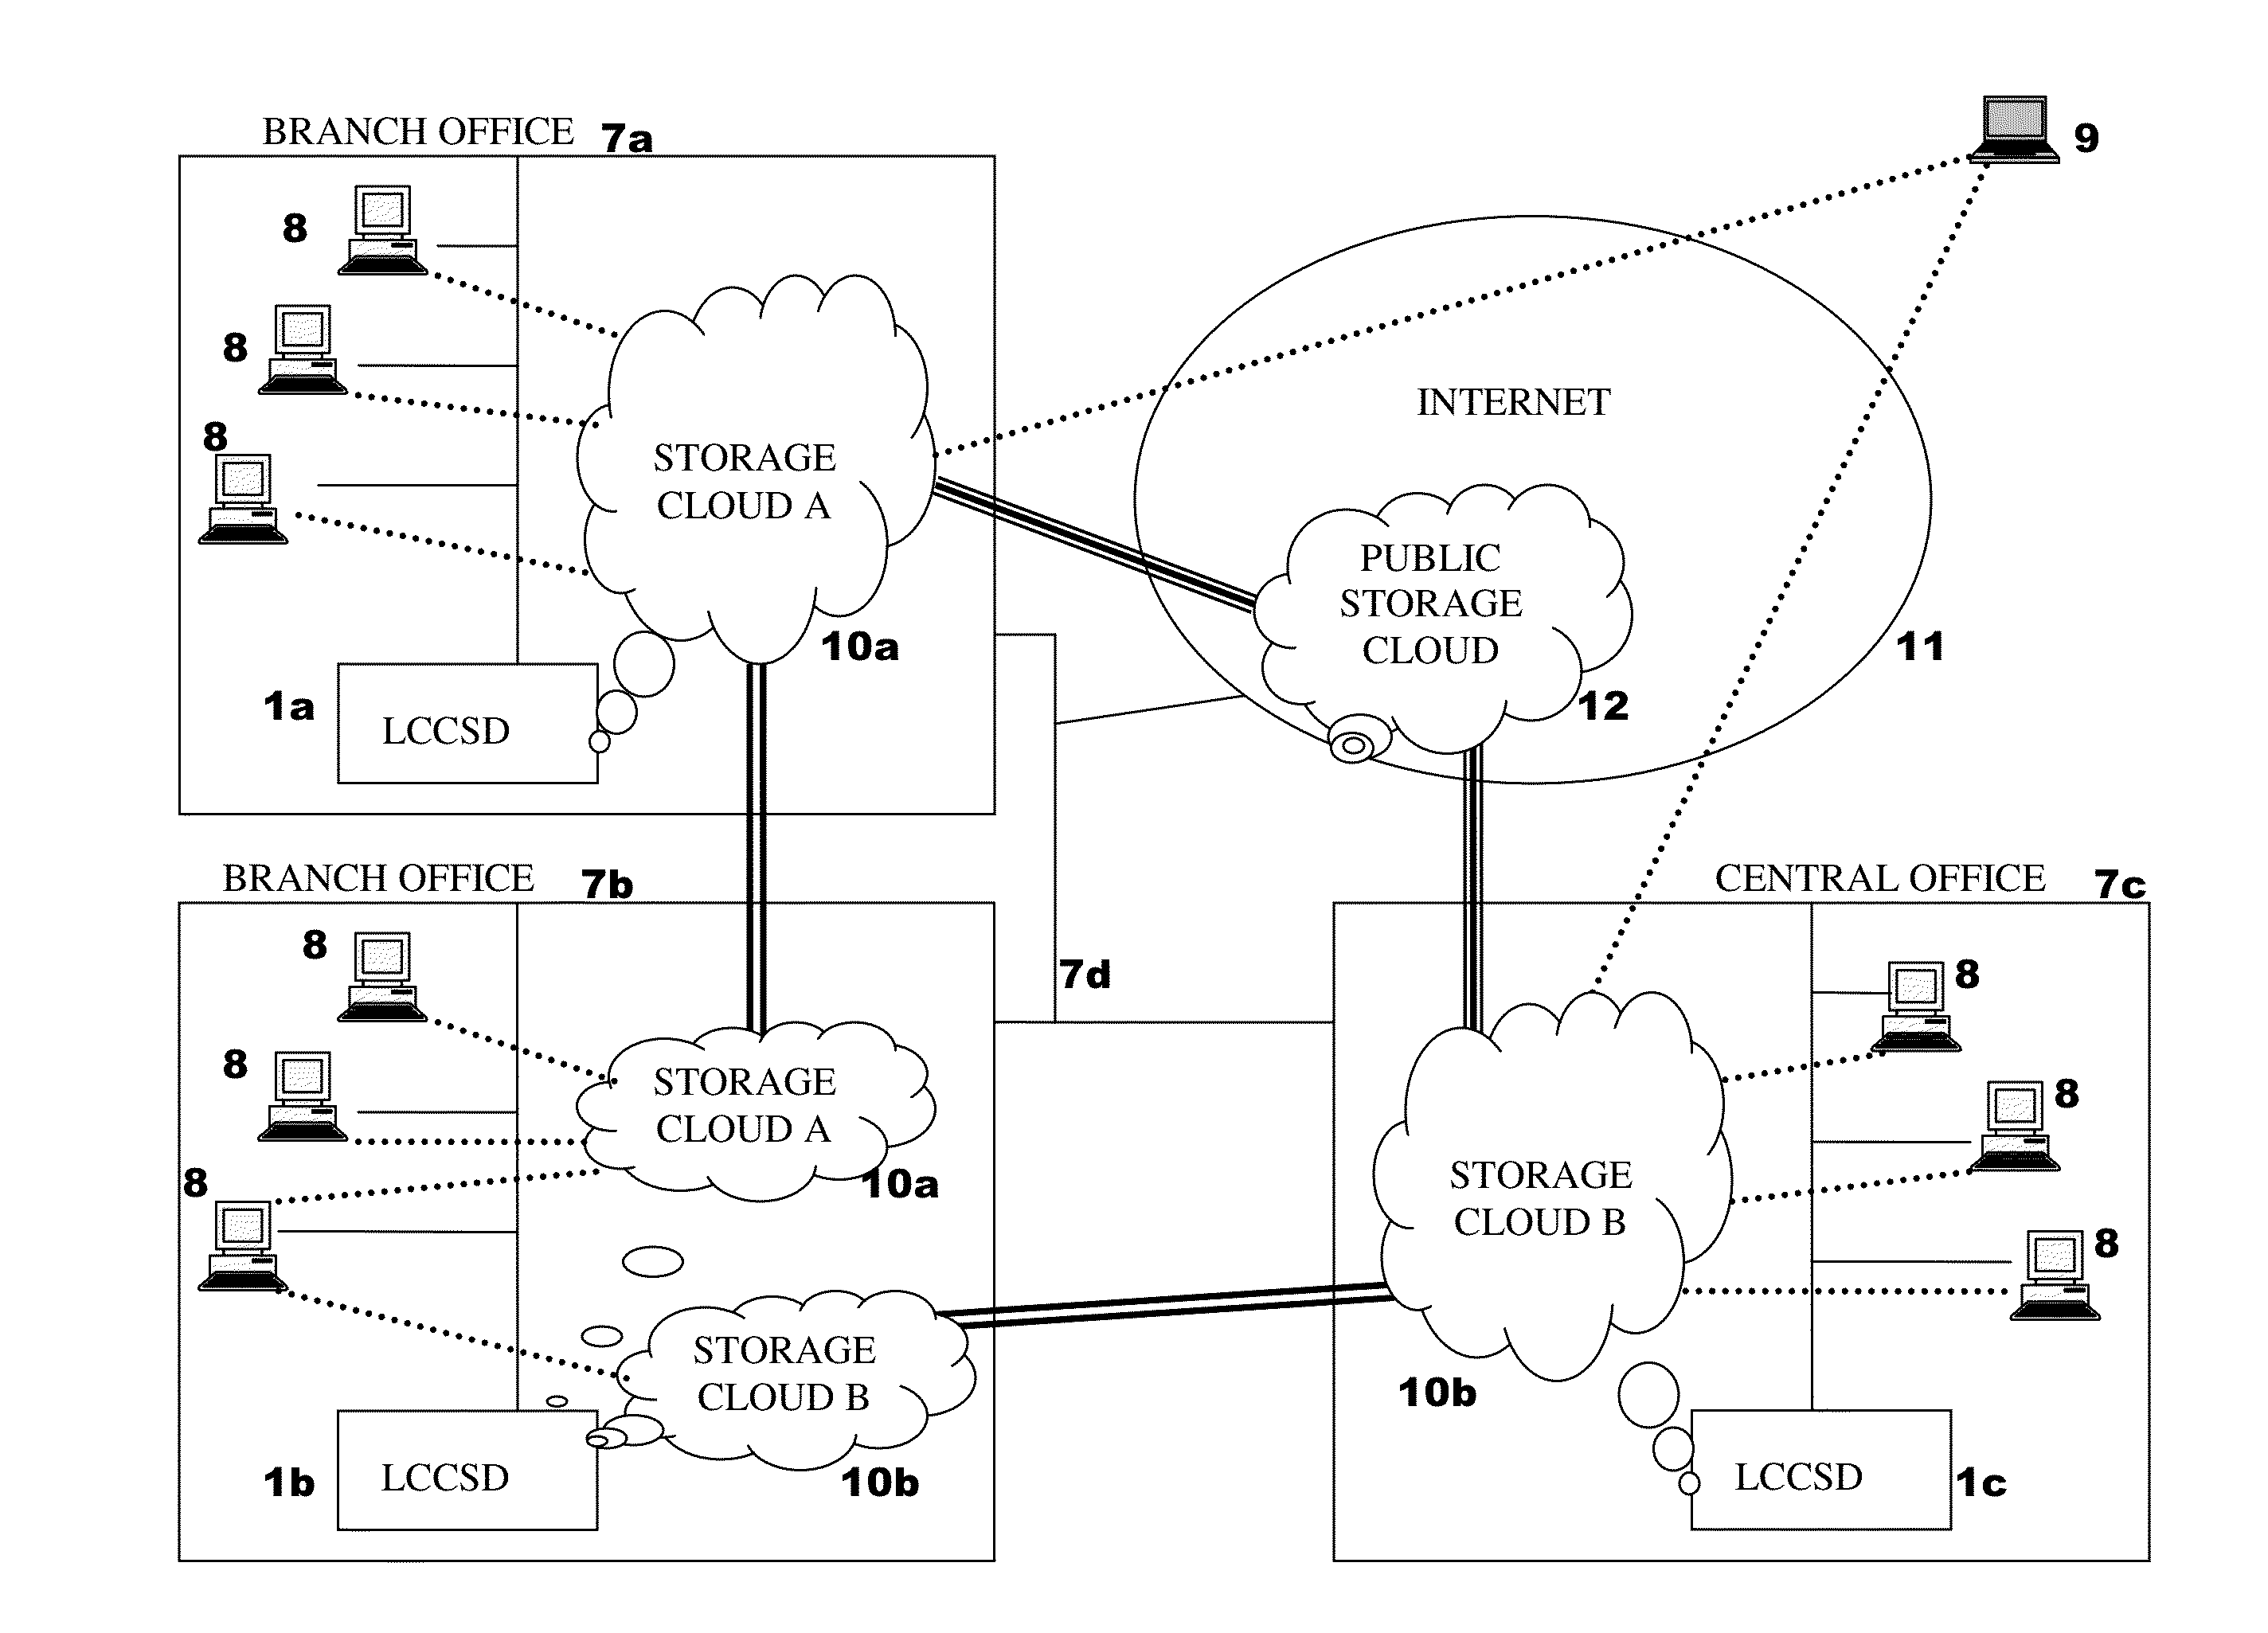 Locally Connected Cloud Storage Device